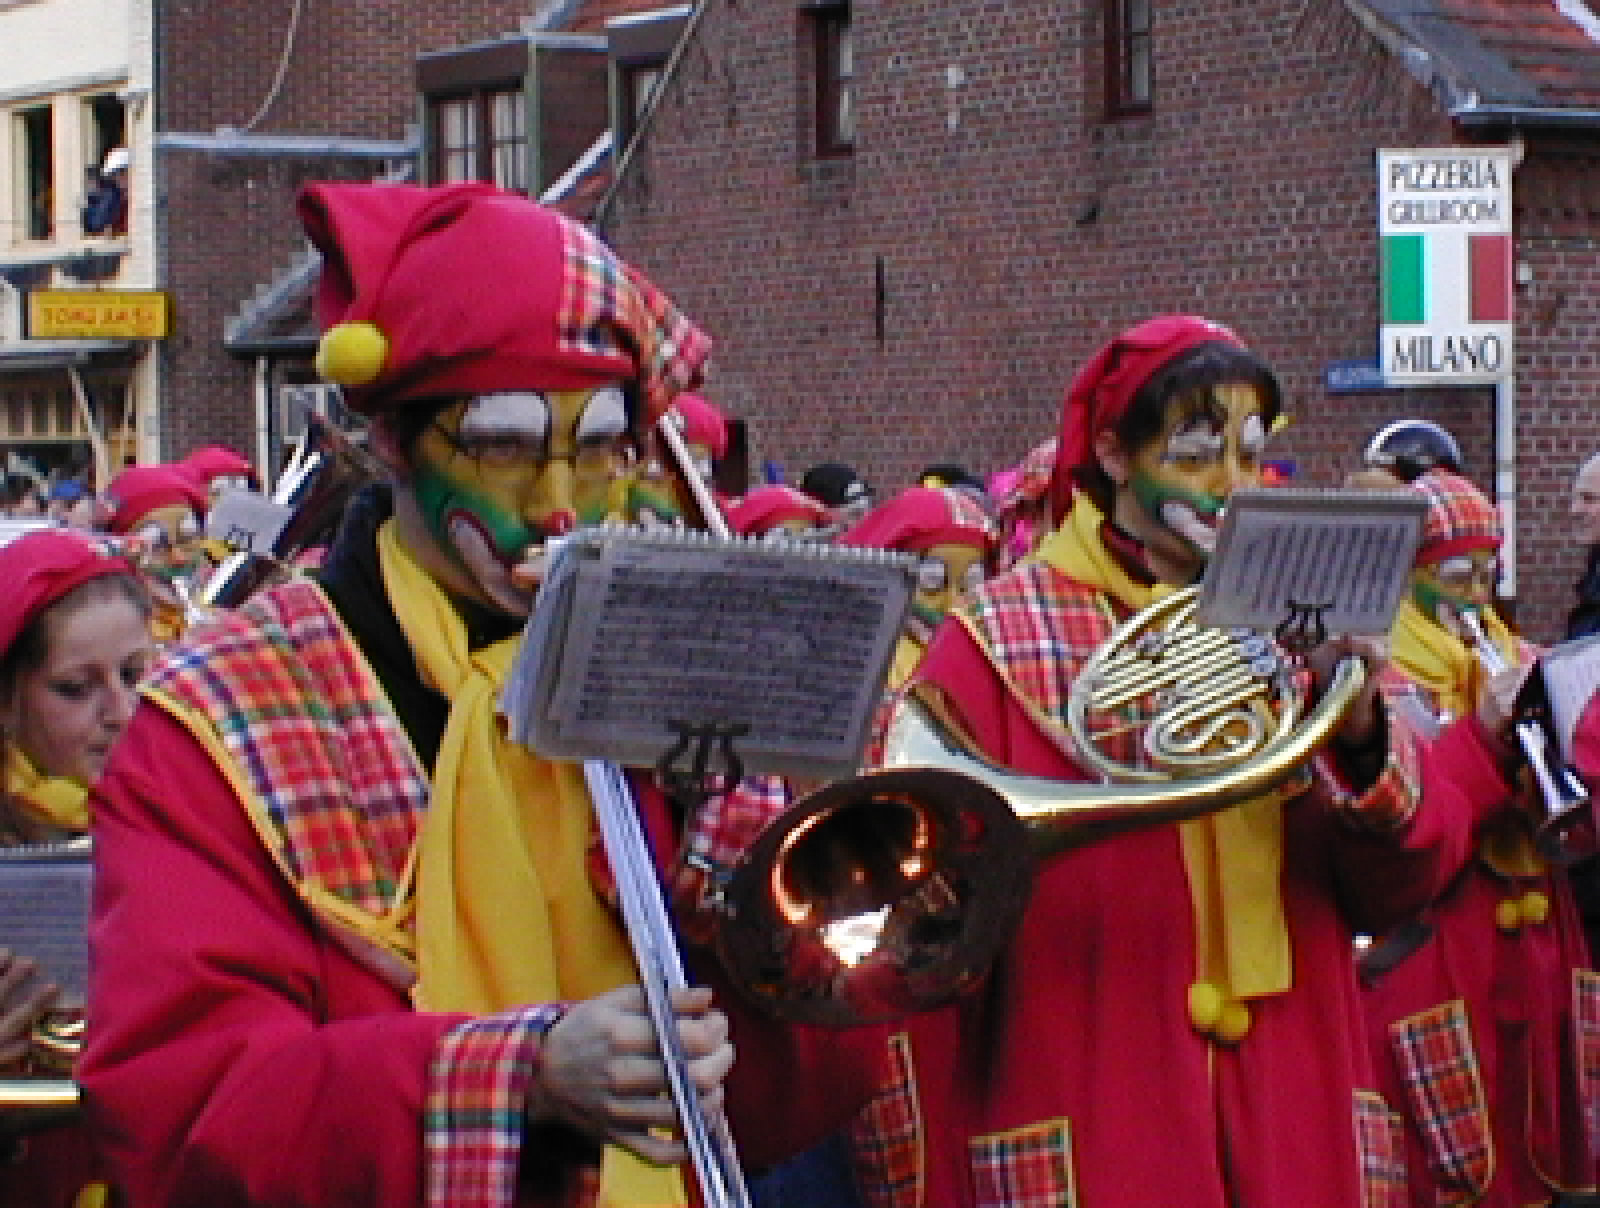 a group of people in fancy clothing with instruments